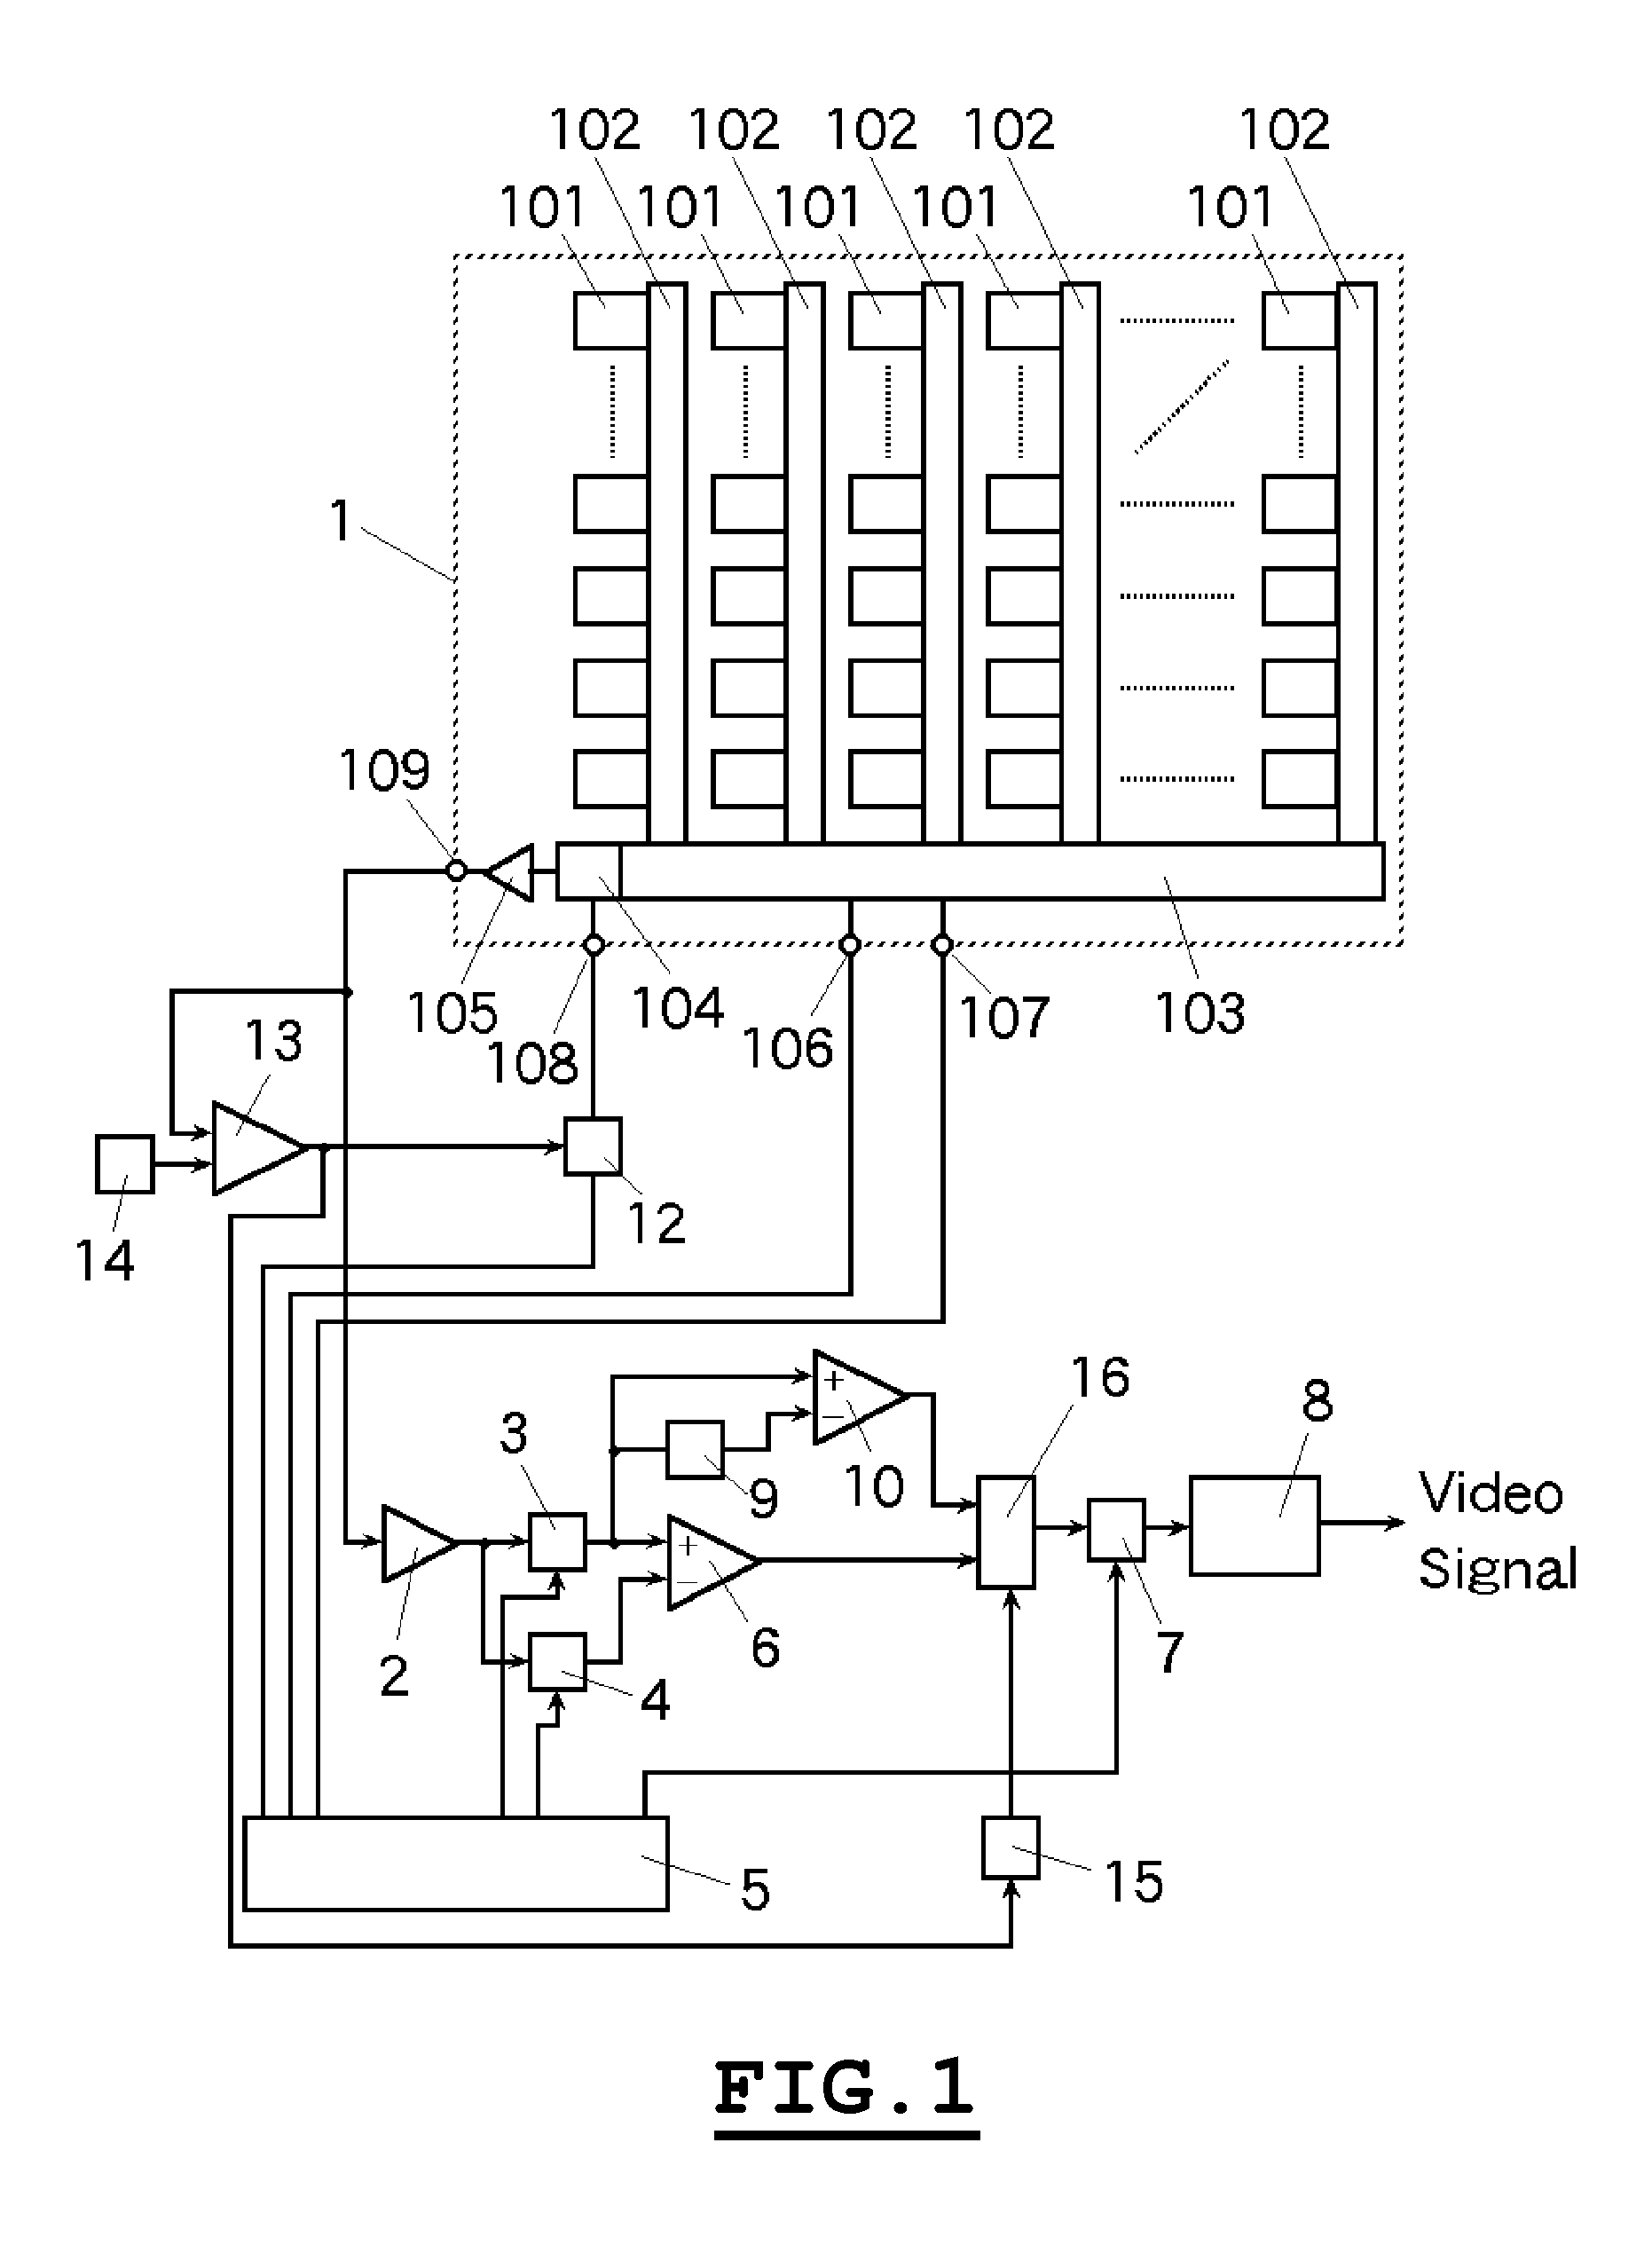 Low noise signal reproducing method for a solid state imaging device